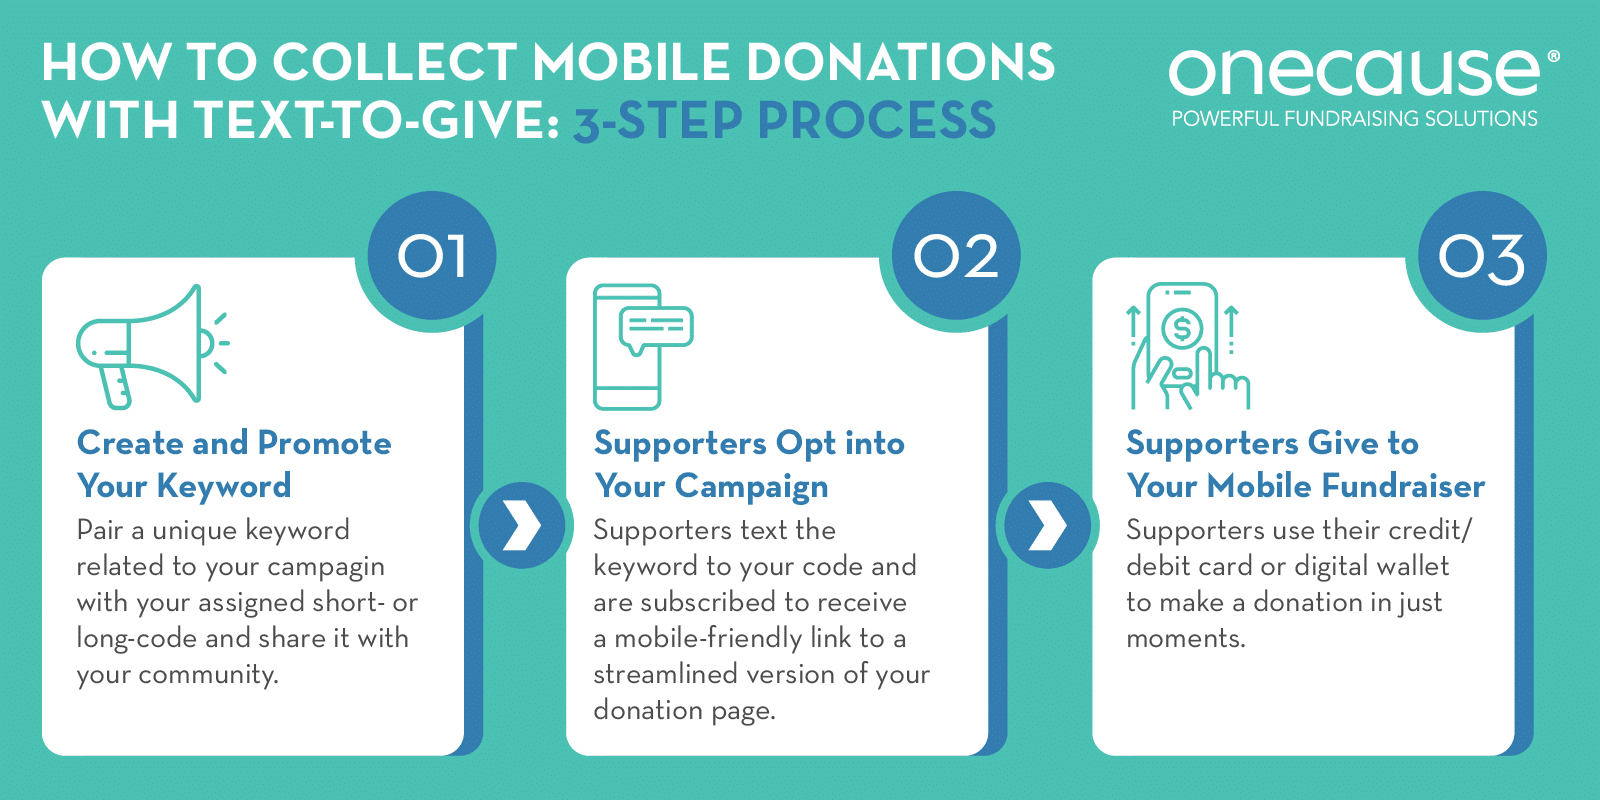 By leveraging a school fundraising platform with text-to-give capabilities, you can effortlessly collect mobile donations.